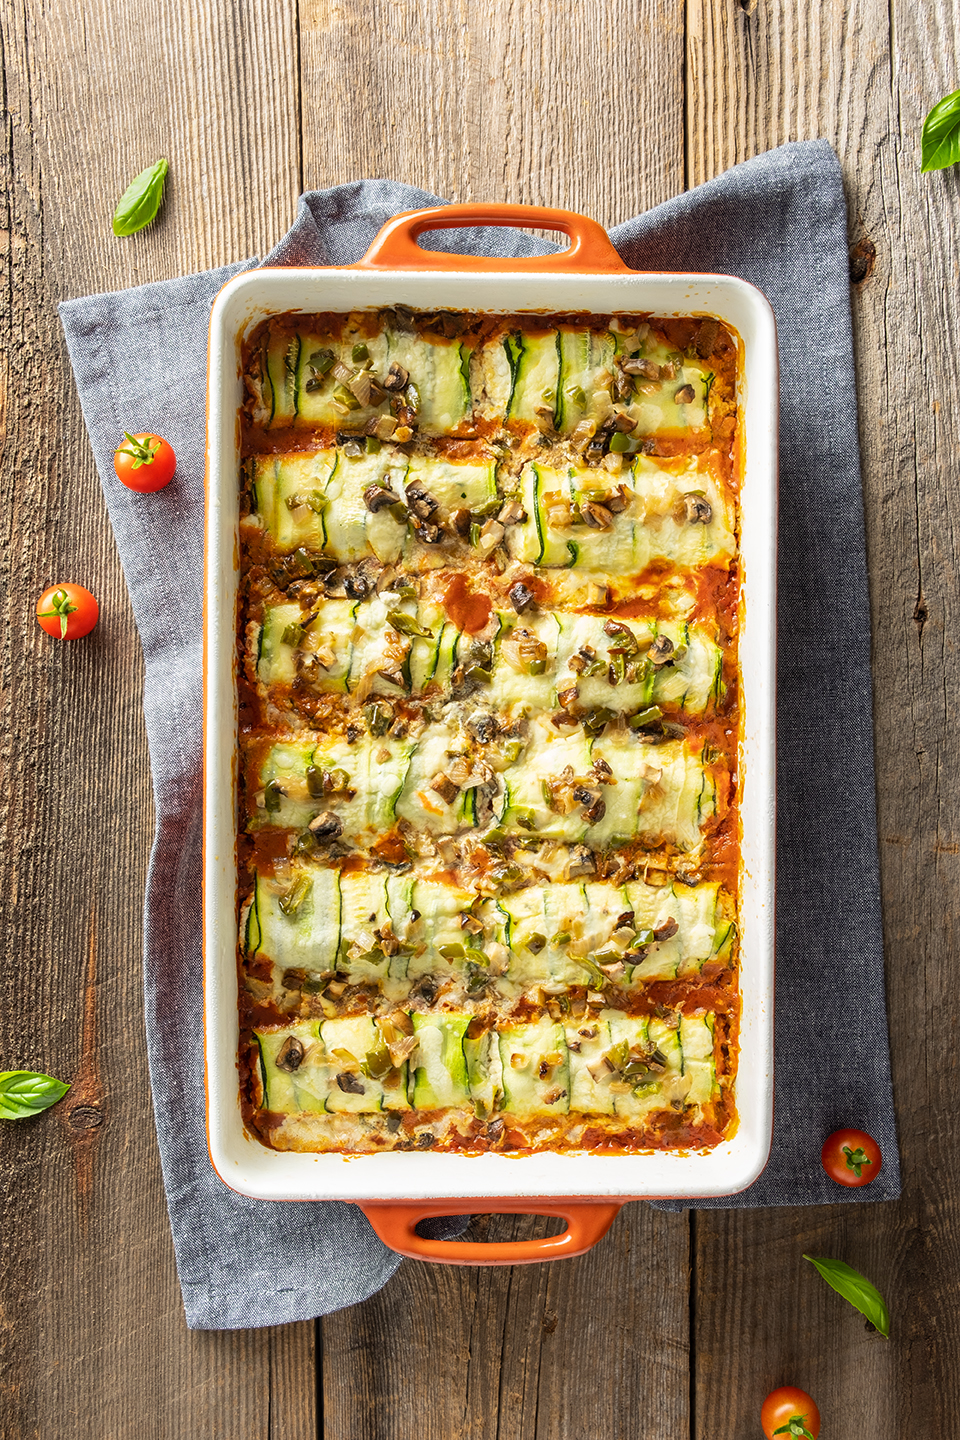  Low carb zucchini and ricotta cannelloni in a orange baking dish with a blue napkin.  Basil and cherry tomatoes on a rustic wooden background.  